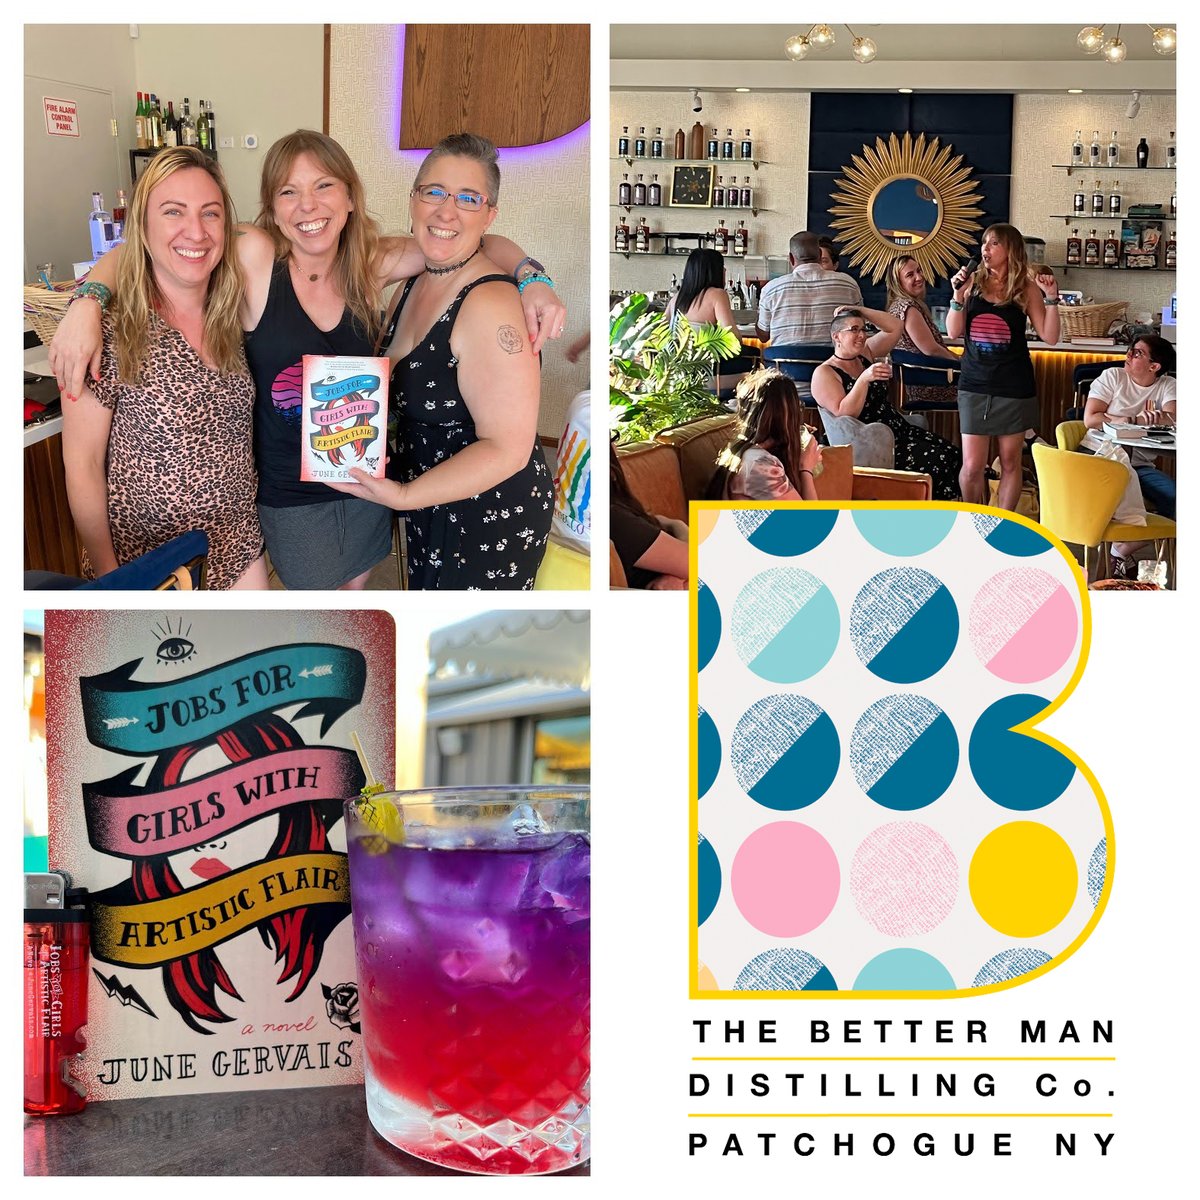 Long Island lovers of books, cocktails & munchies! JOBS FOR GIRLS WITH ARTISTIC FLAIR is the July pick for @better_man_book. Join us this Thurs. 7/28 at 6 pm. Better Man Distilling Co, 161 River Ave, Patchogue, NY @vikingbooks @pameladormanbooks